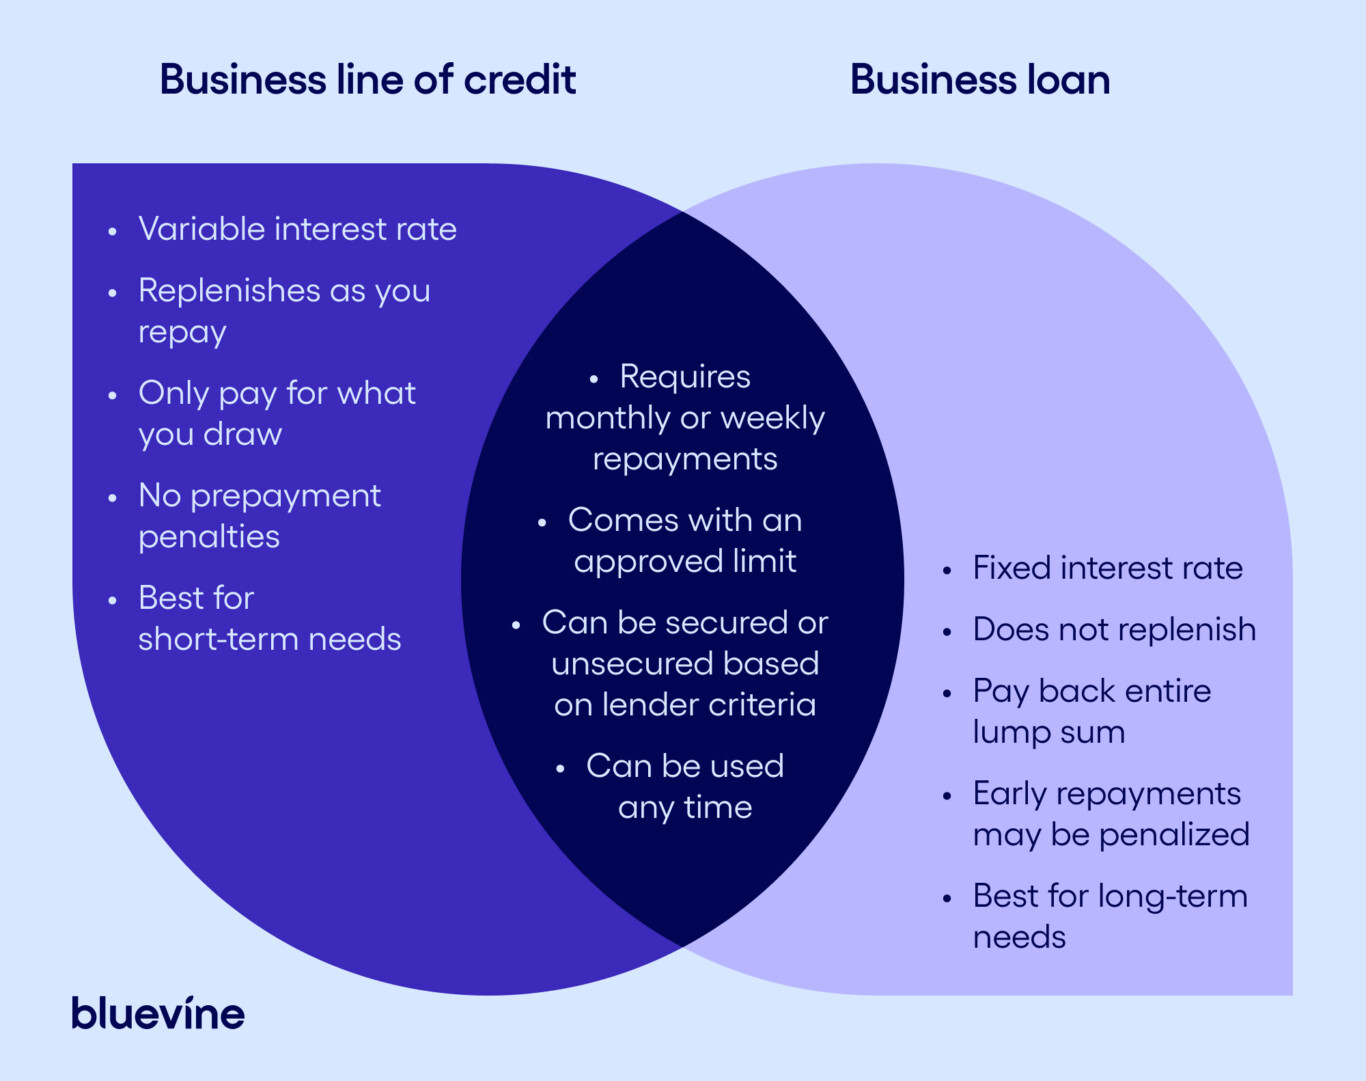 Venn diagram of a business line of credit vs. a business loan.

Business line of credit: has a variable interest rate, replenishes as you repay, you only pay for what you draw, no prepayment penalties, best for short-term needs.

Business loan: fixed interest rate, does not replenish, pay back entire lump sum, early repayments may be penalized, best for long-term needs.

Both: require monthly or weekly repayments, come with approved limits, can be secured or unsecured based on lender criteria, and can be used any time.